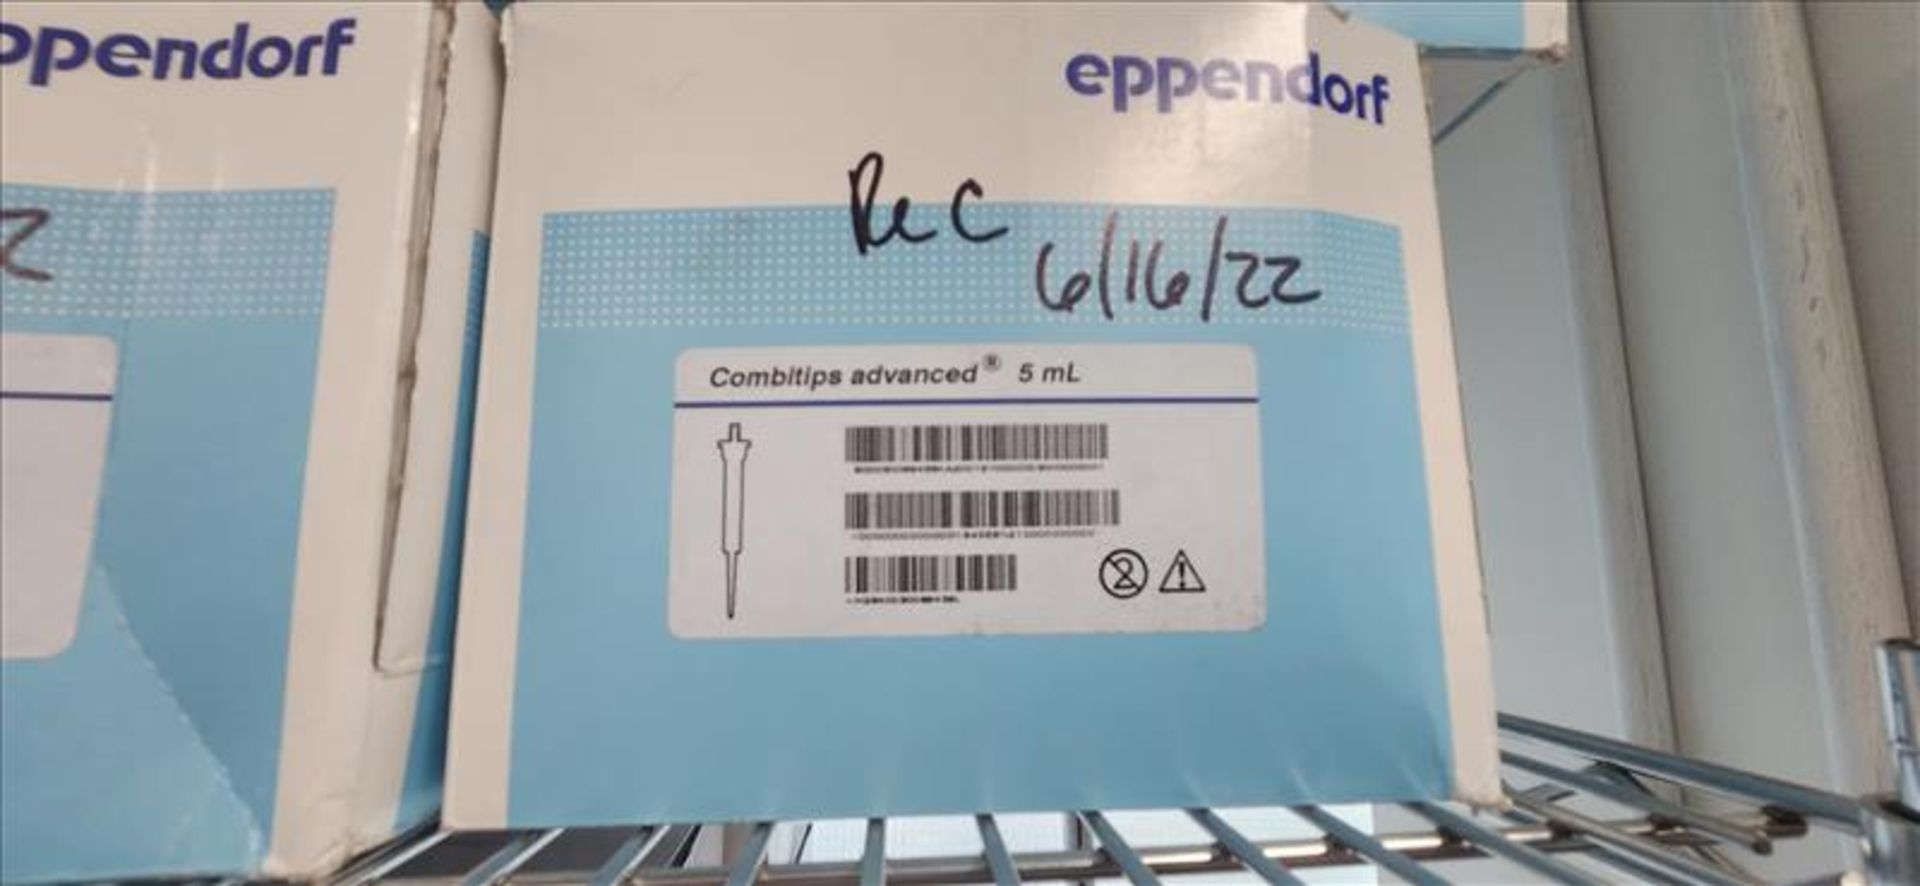 Lot of Eppendorf Combitips advanced Pipette Tips varying volumes